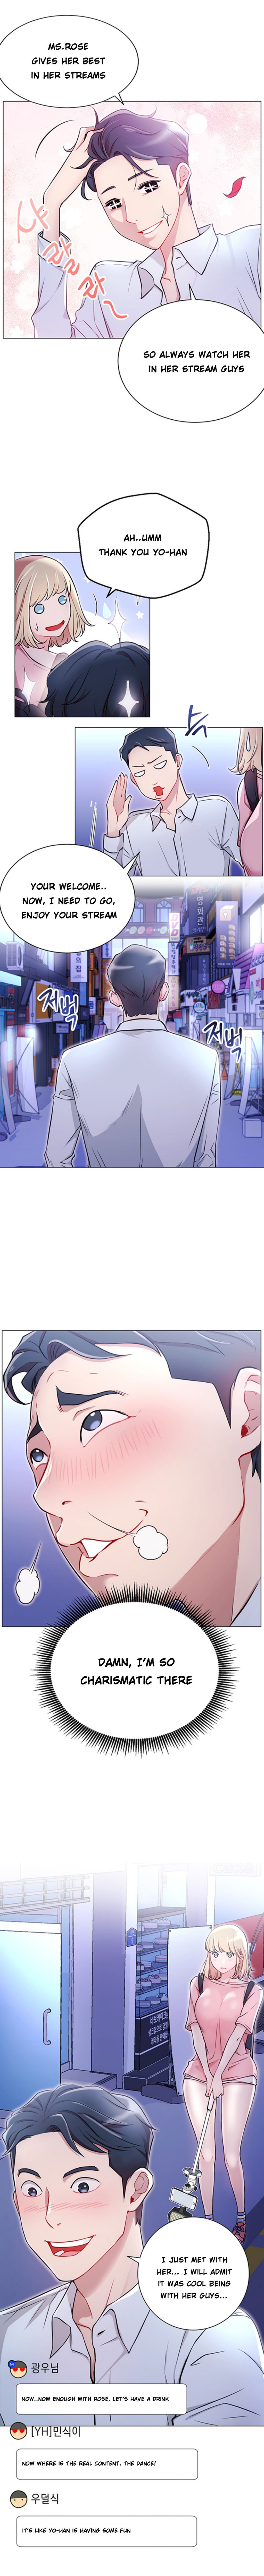 do-you-want-to-collab-chap-4-5